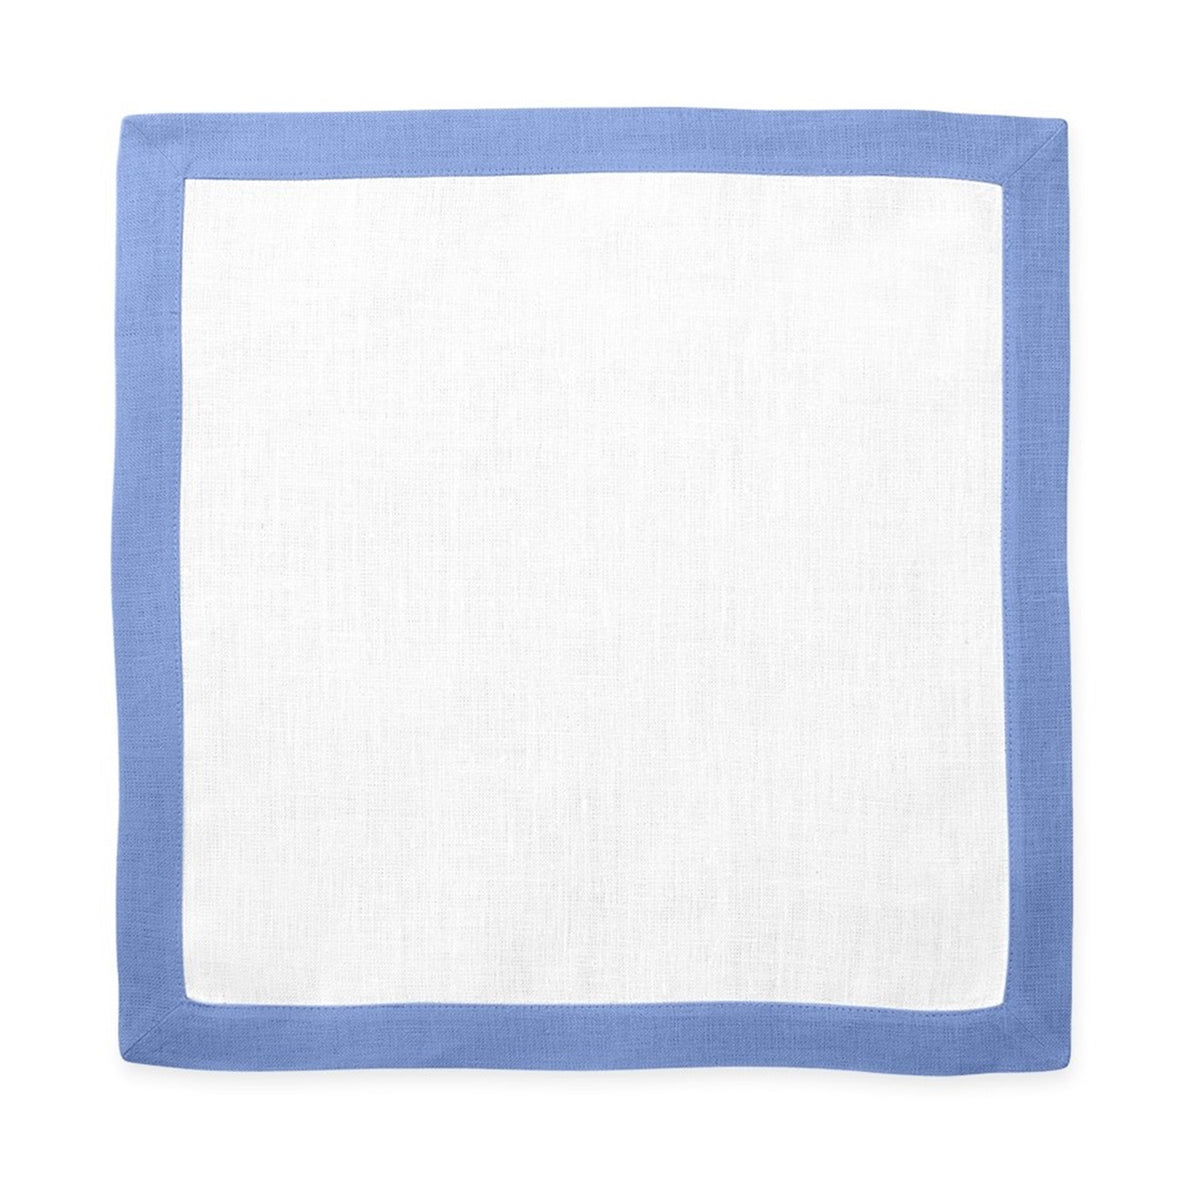 Silo Image of Matouk Border Placemat in Color Sky Blue